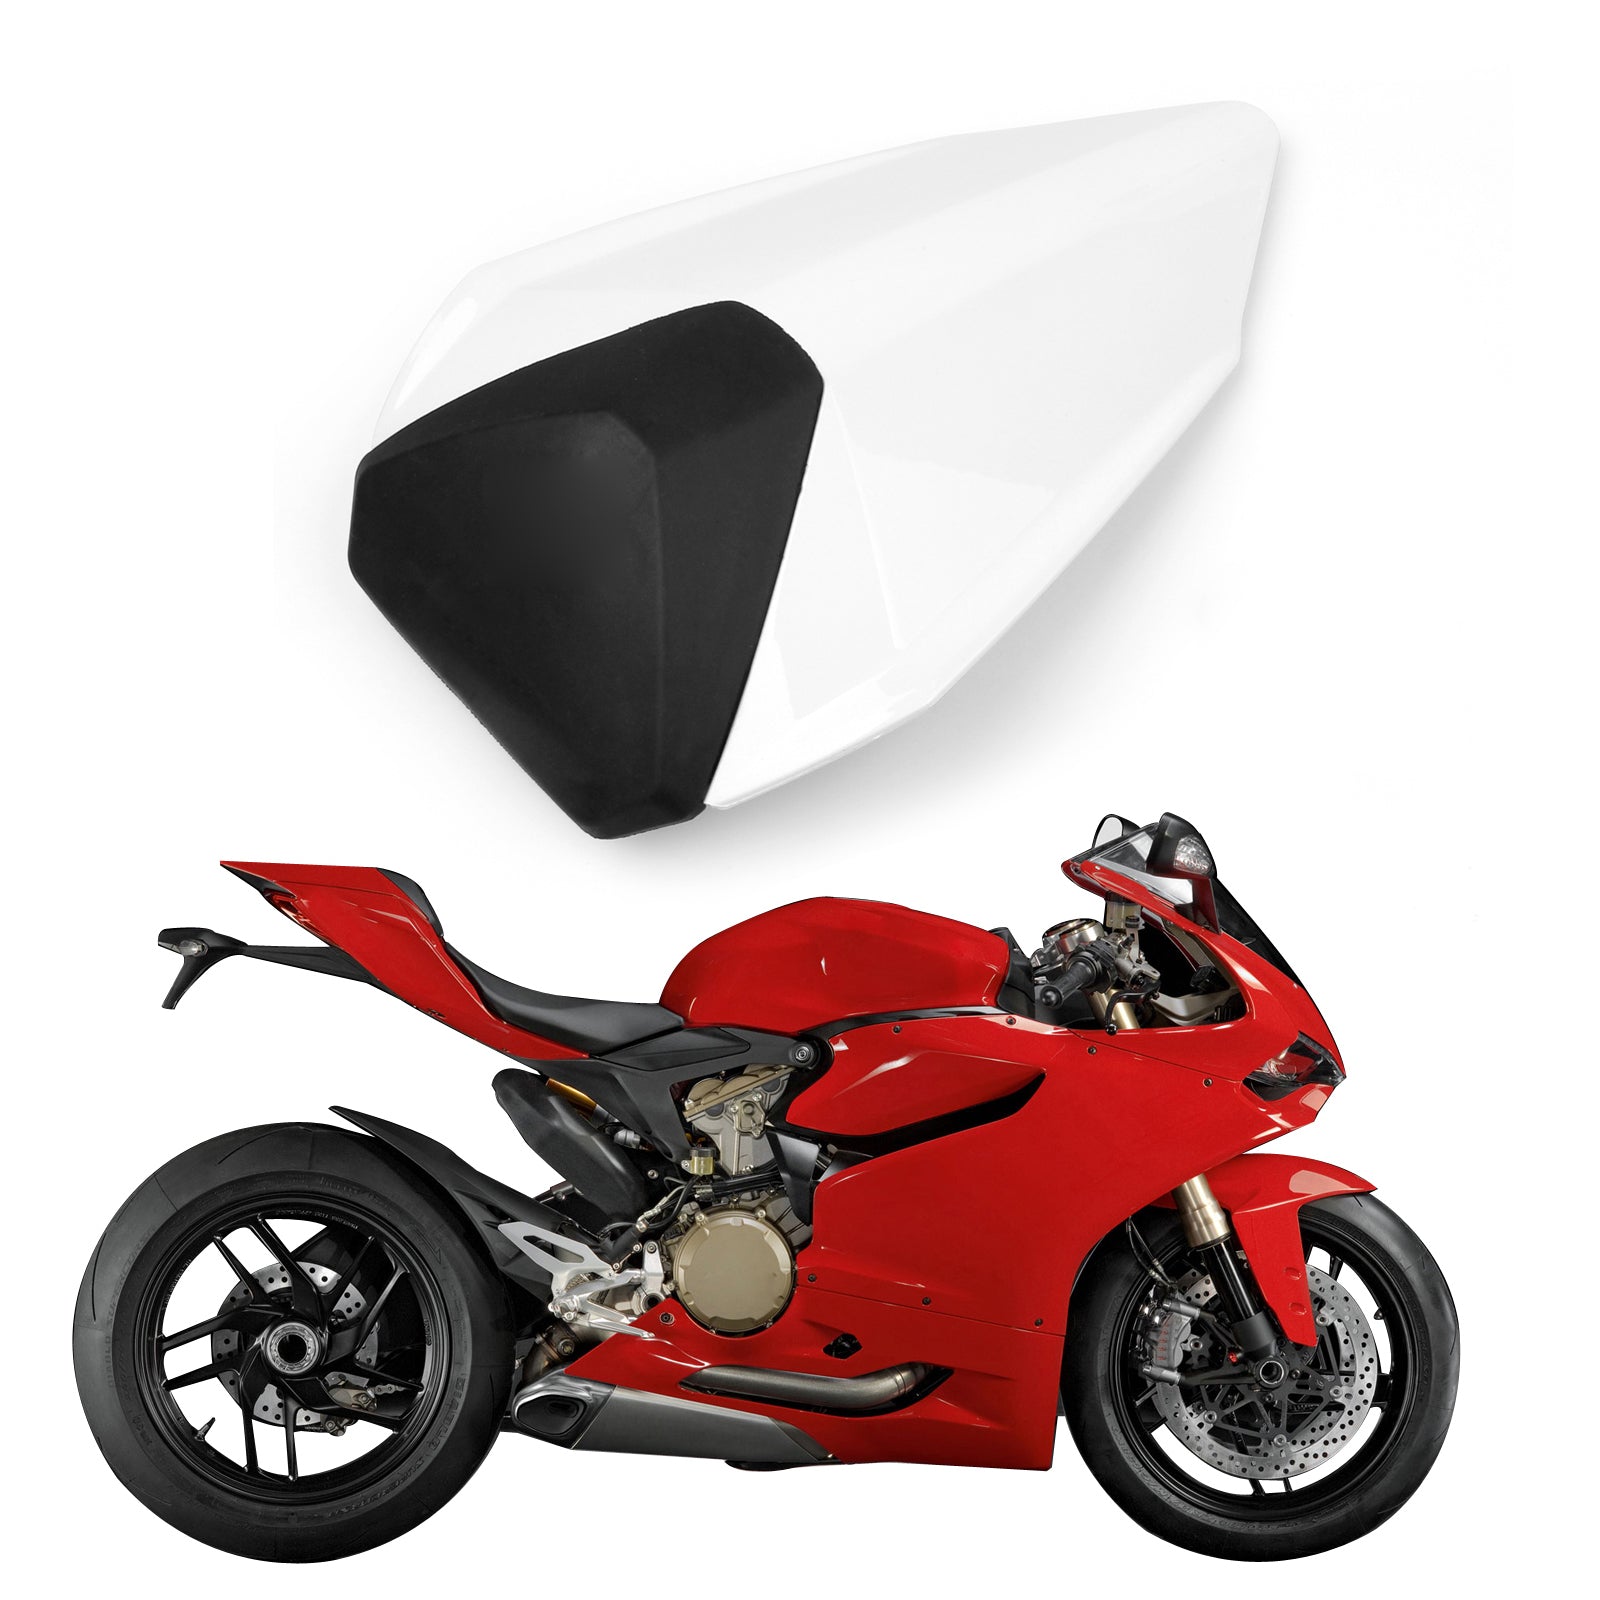 Ducati 899 1199 Panigal 2012-2015 Rear Seat Cover cowl